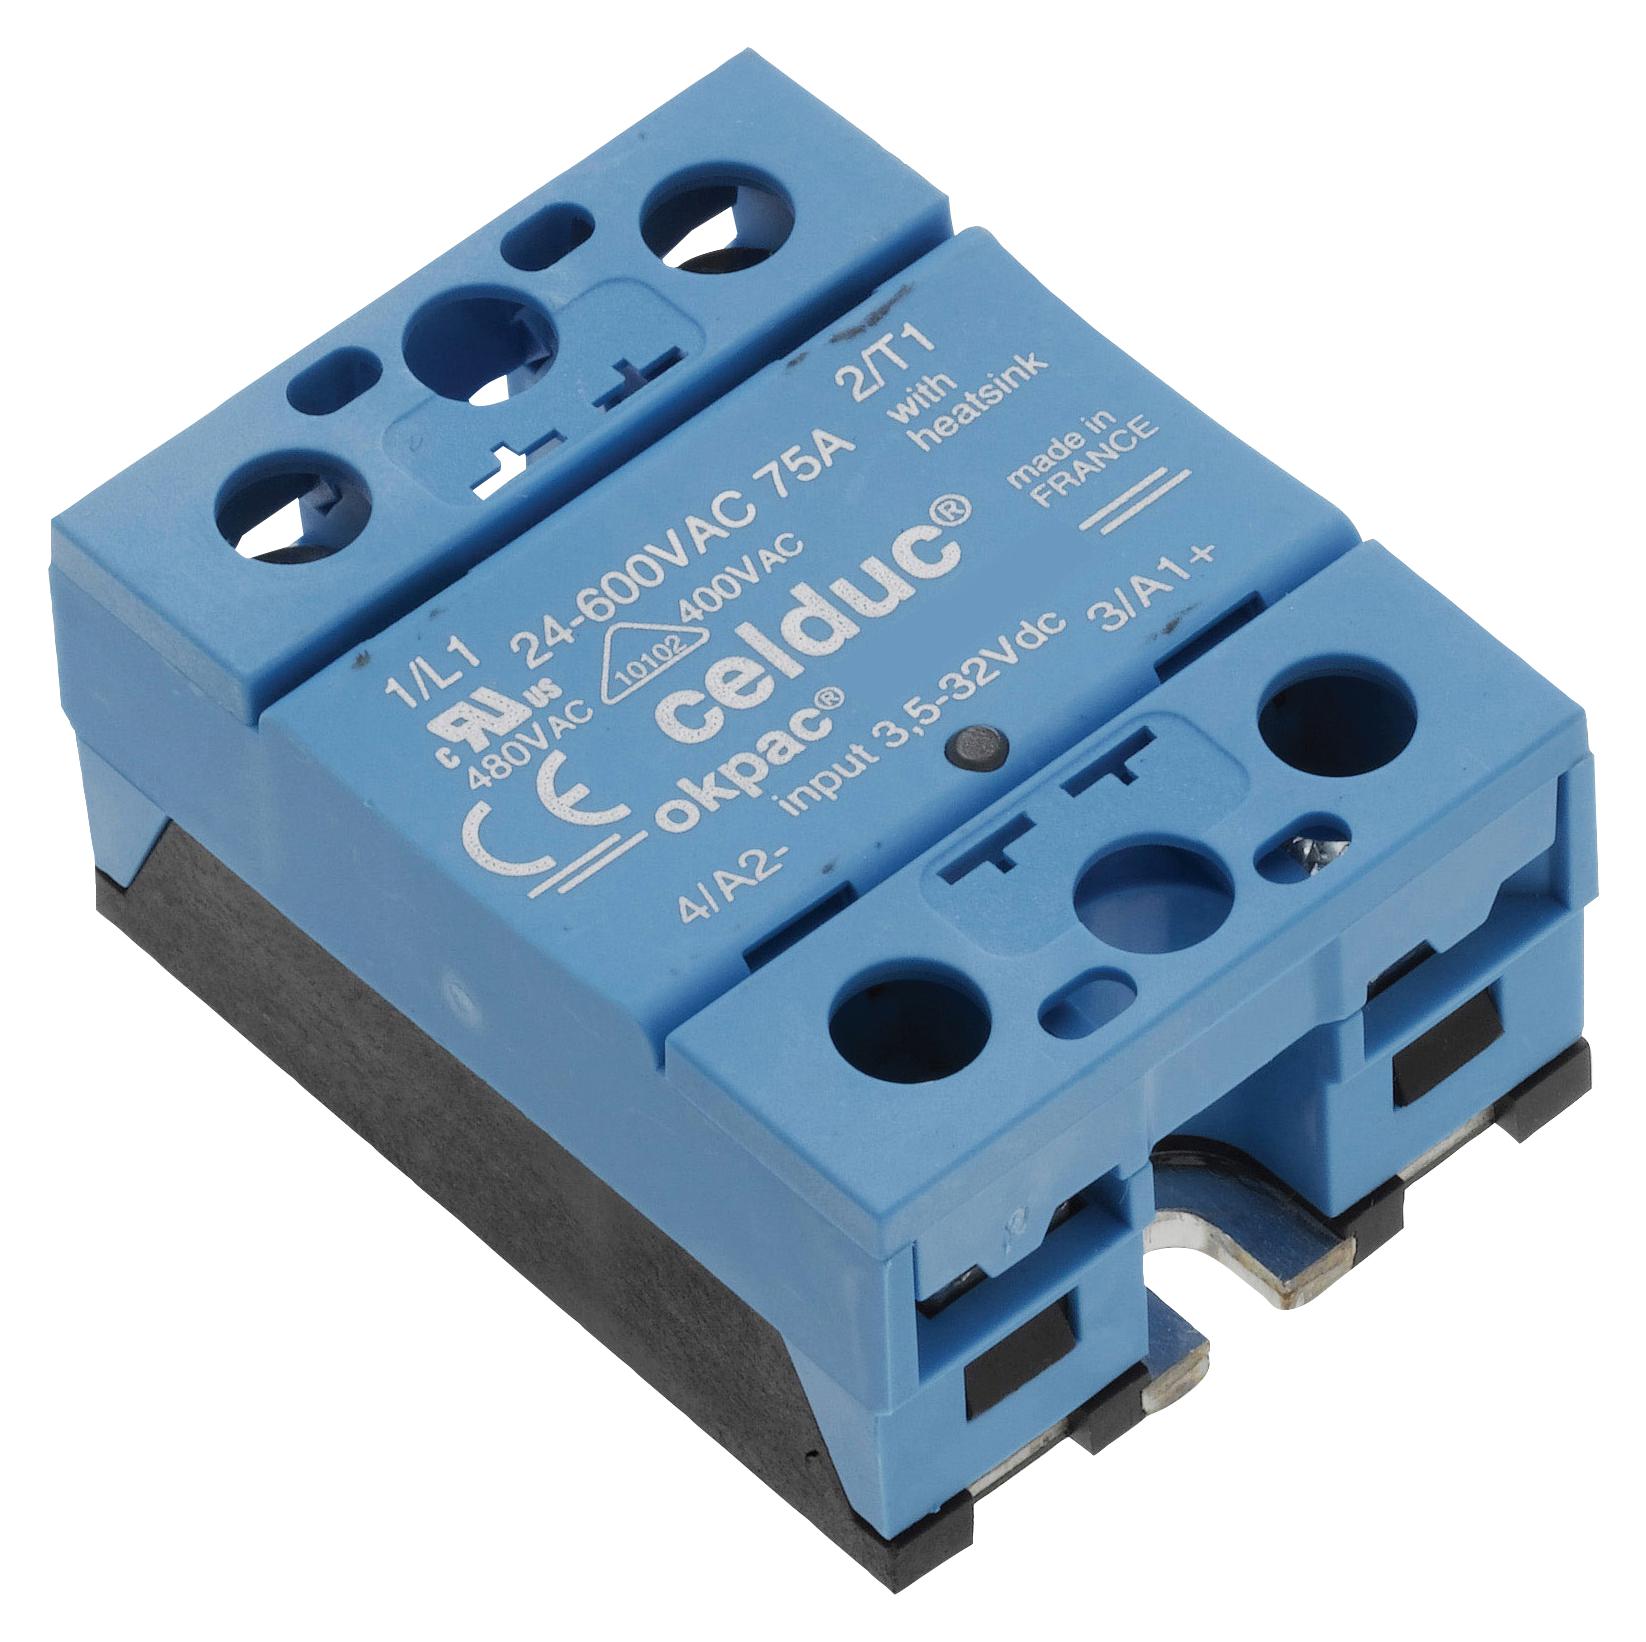 SO763090 SOLID STATE RELAY, 3.5-32V, PANEL CELDUC